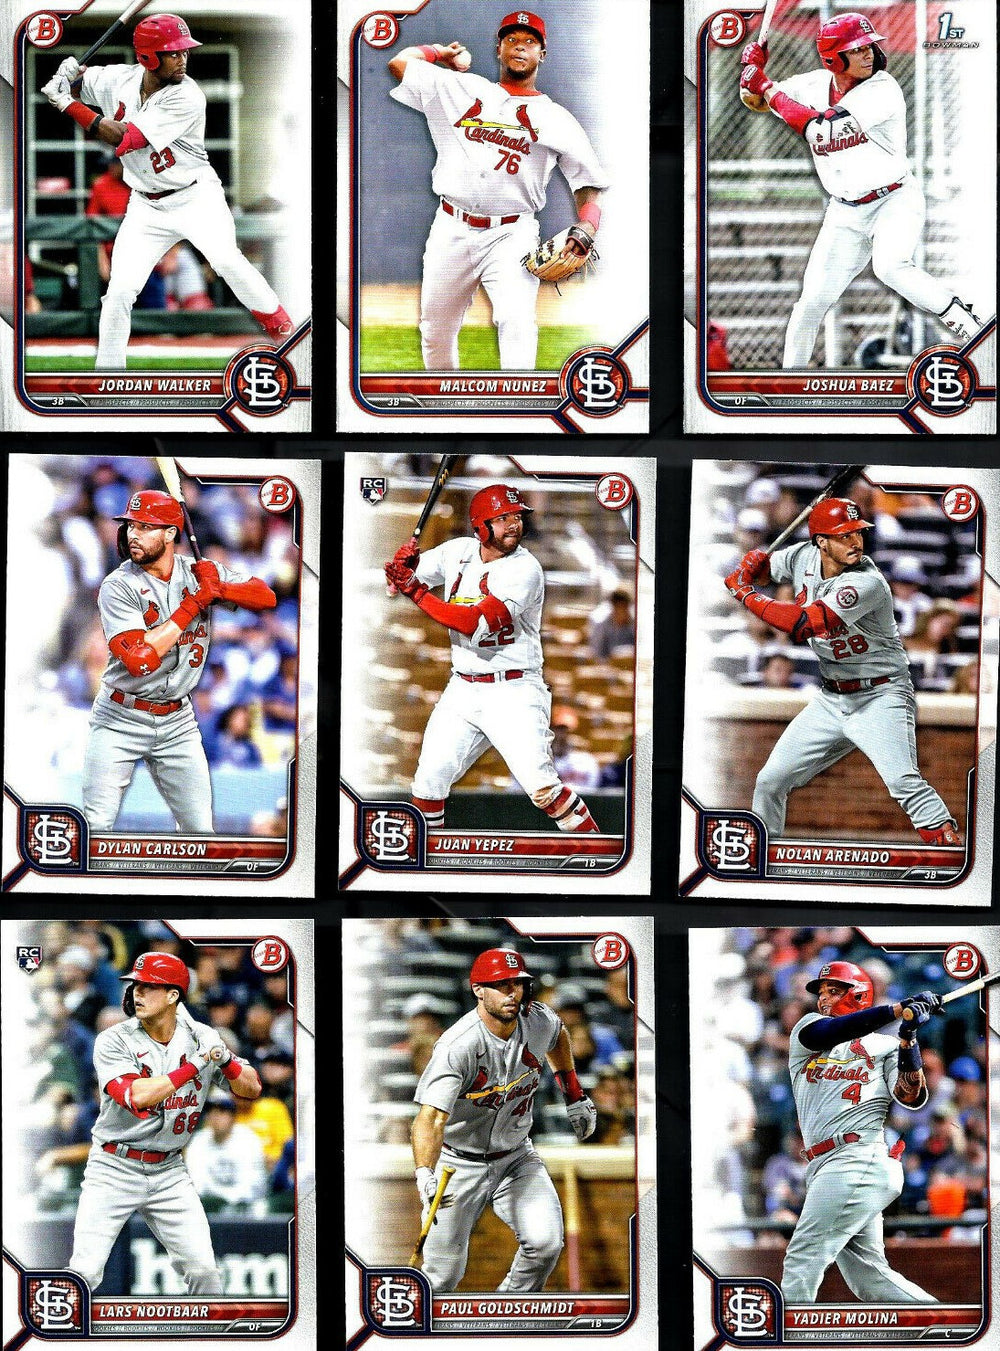 St. Louis Cardinals 2022 Bowman Series 9 Card Team Set made by Topps with Rookies and Prospects Plus